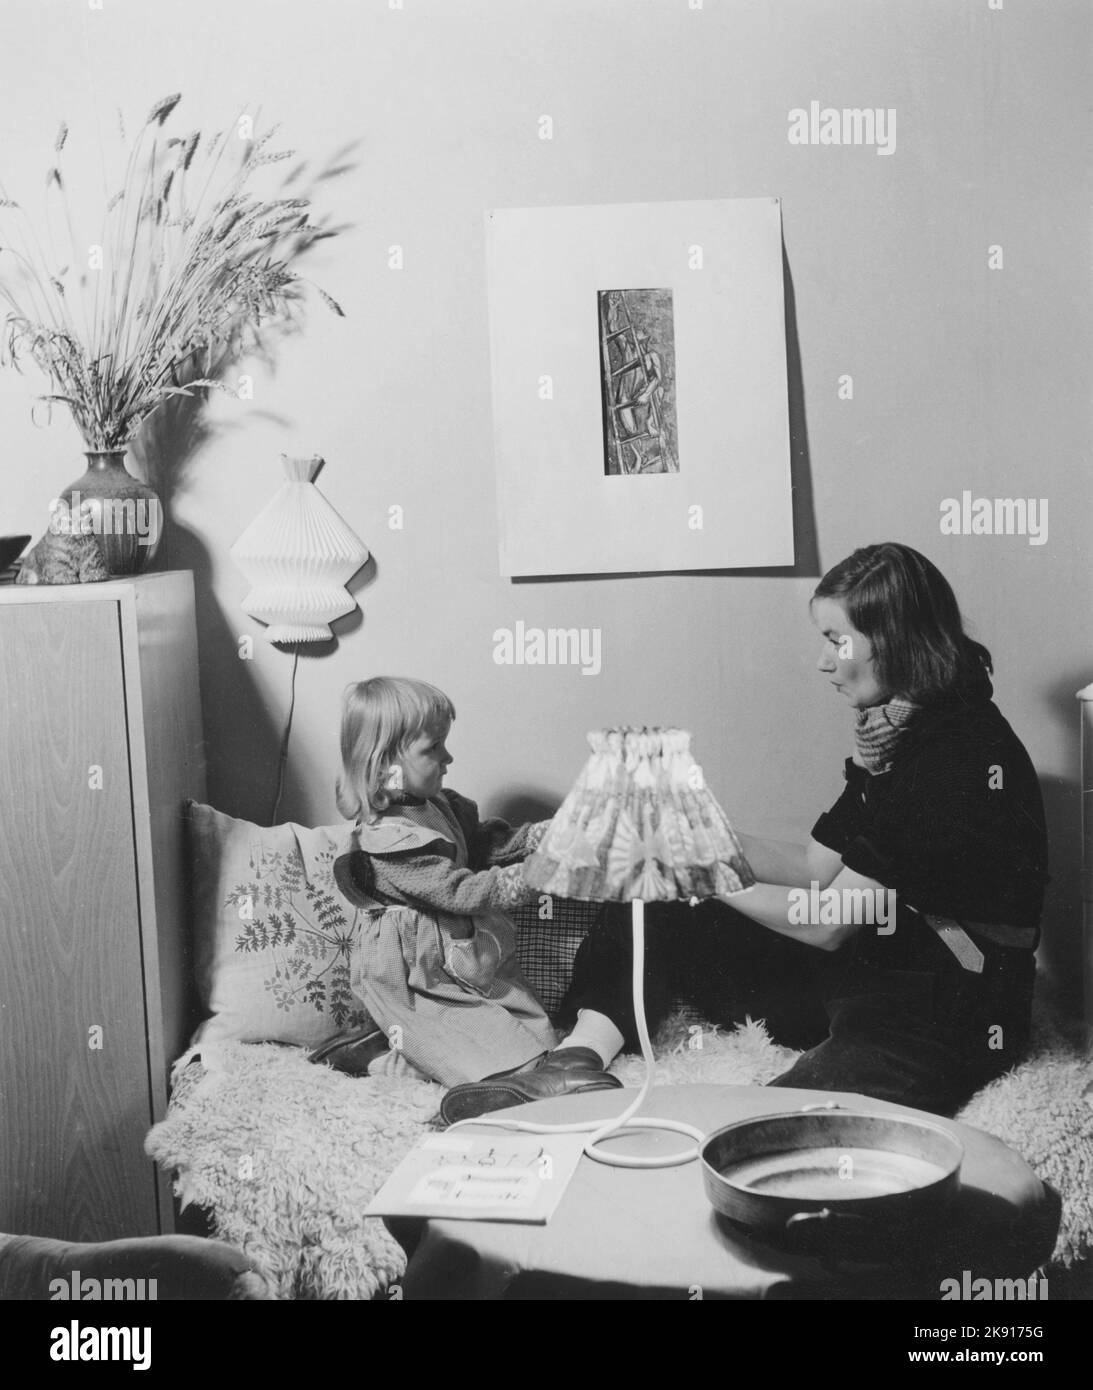 Woman in the 1950s. A young dark-haired woman at home with her daughter. Sweden 1950 Stock Photo